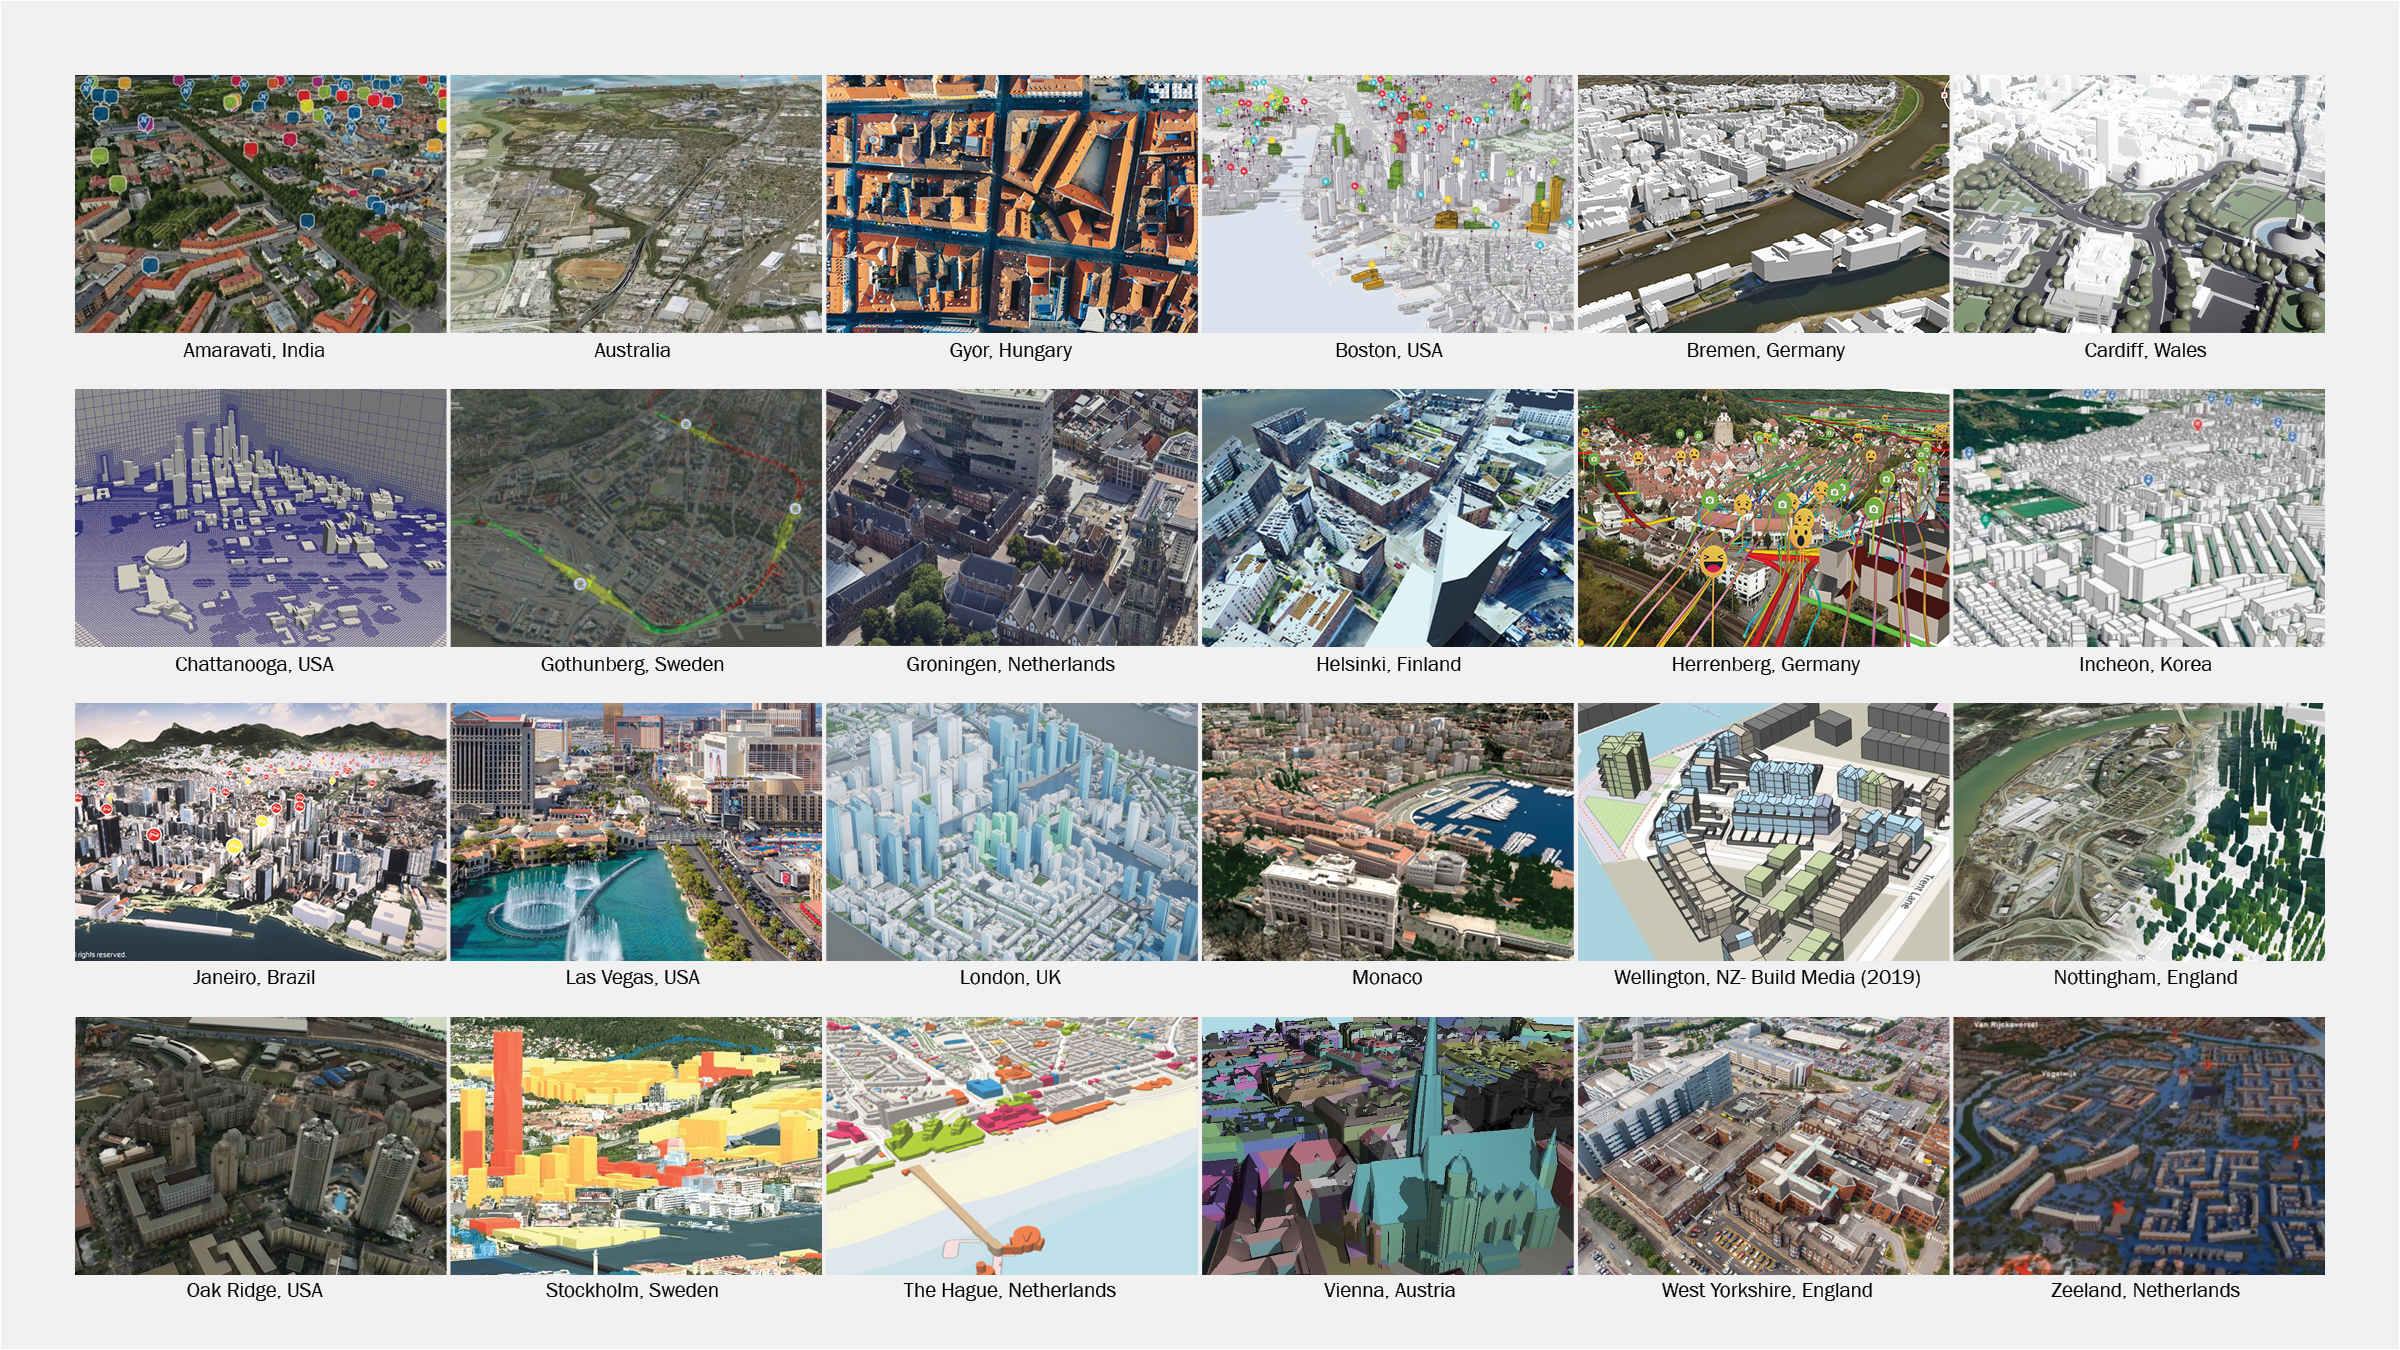 Catalog of urban simulation case studies, showing recent "Digital Twin" projects. 